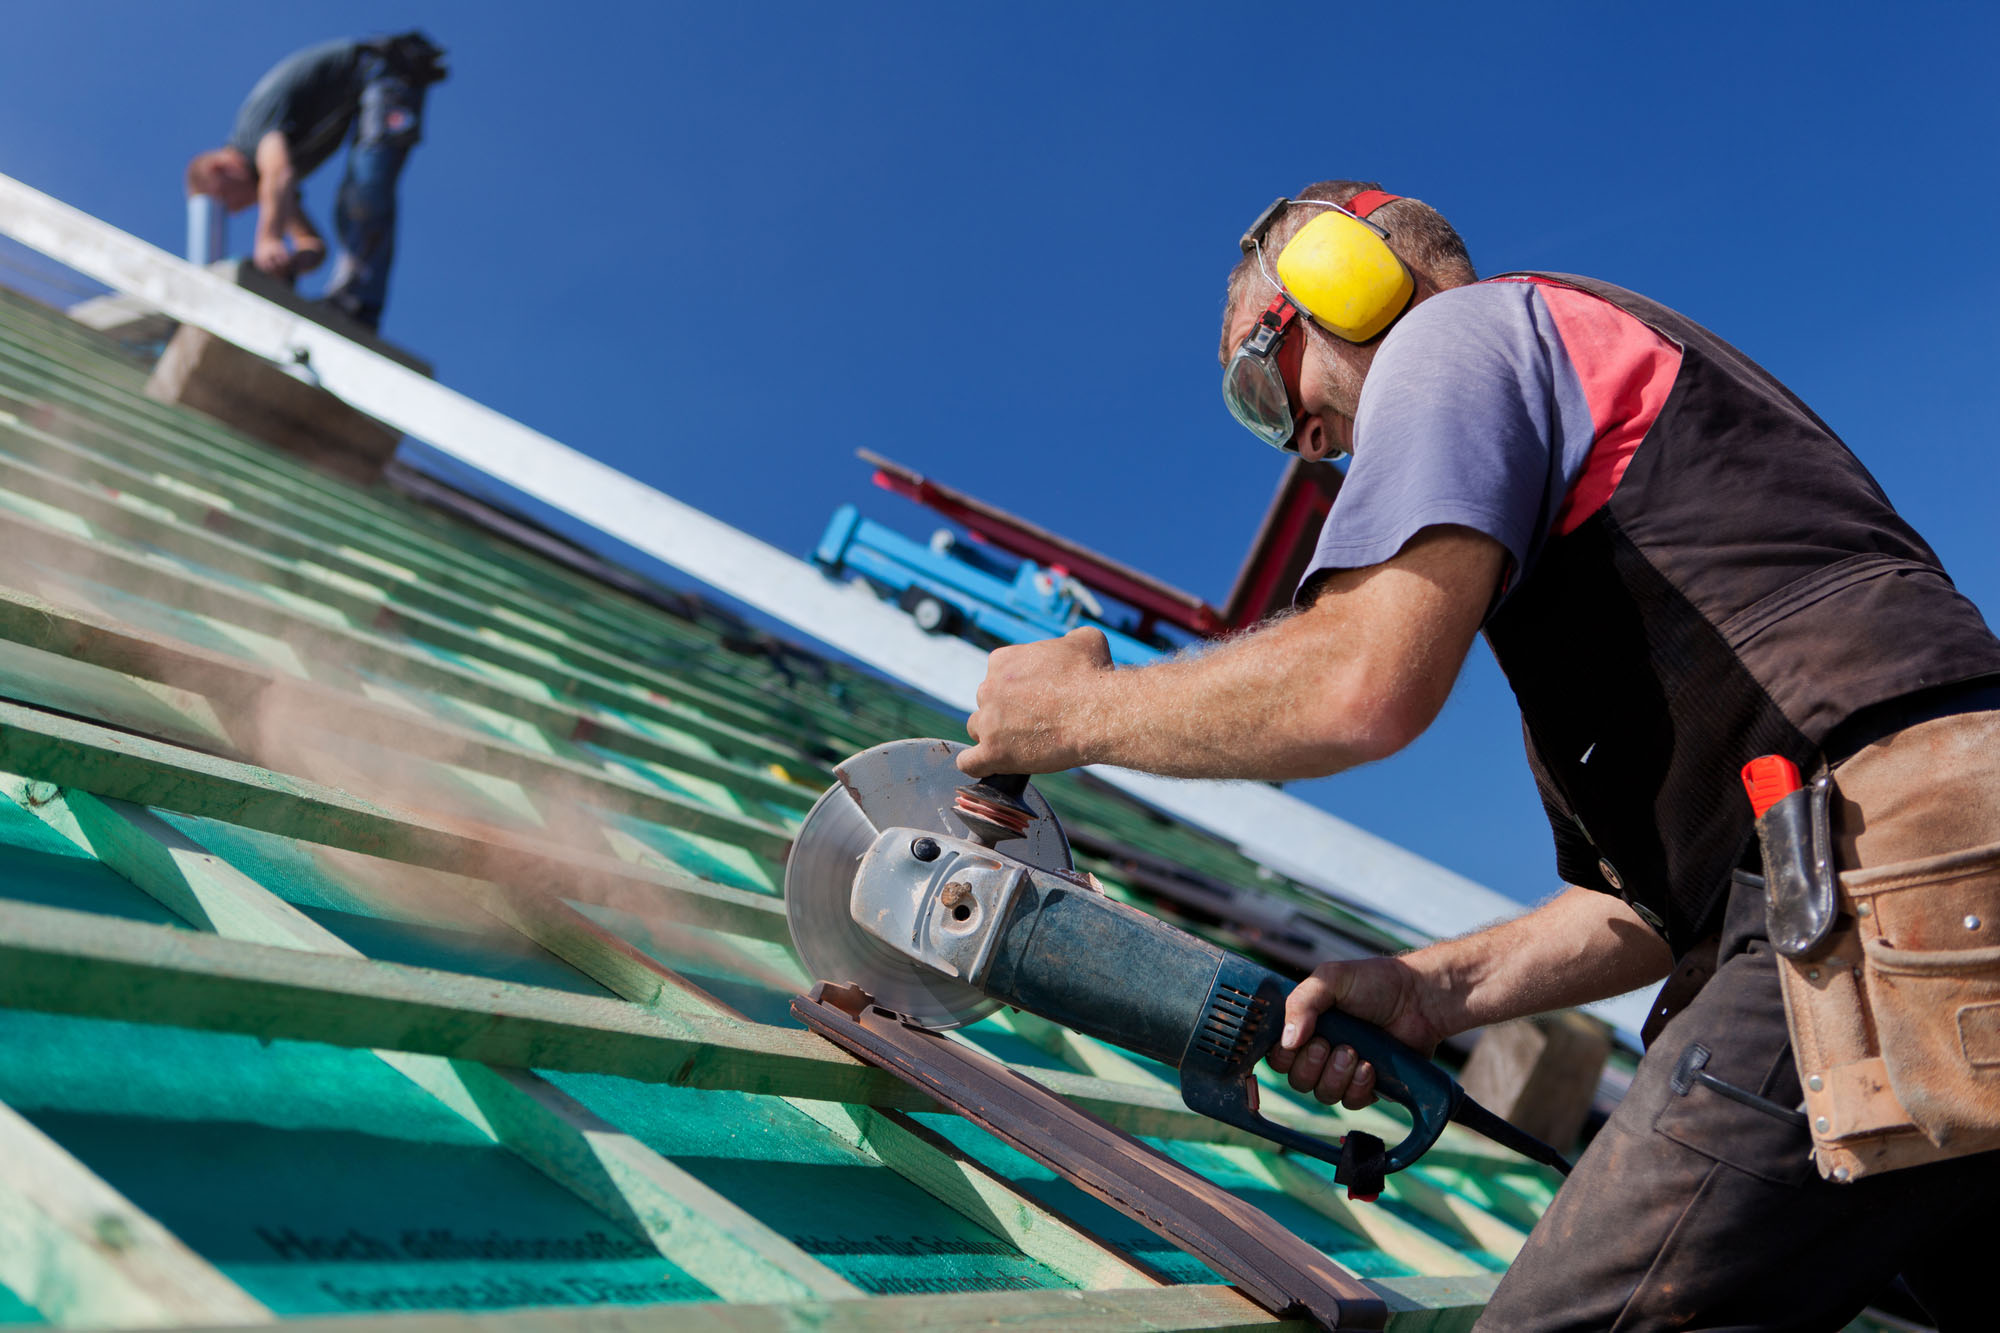 Reasons To Hire A Roofing Contractor